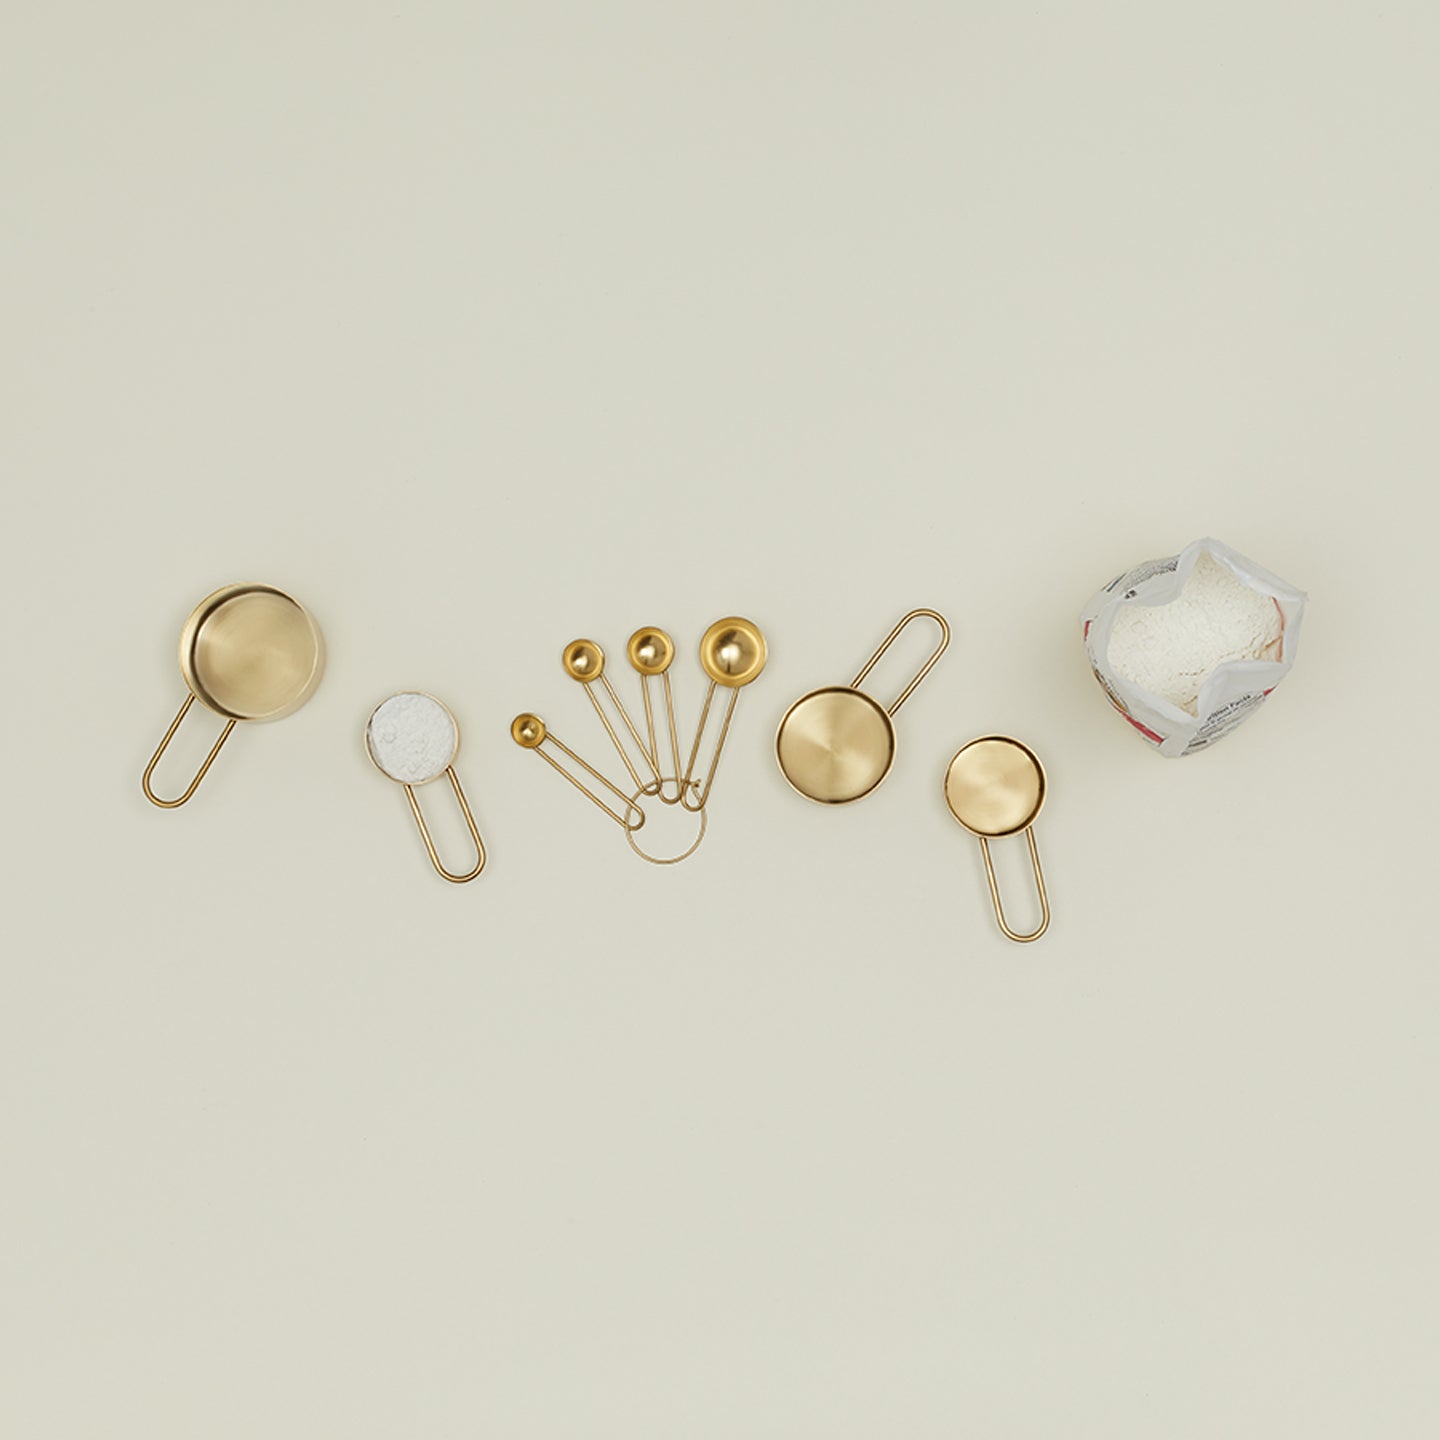 An elegant assortment of metallic objects against a minimalistic background.